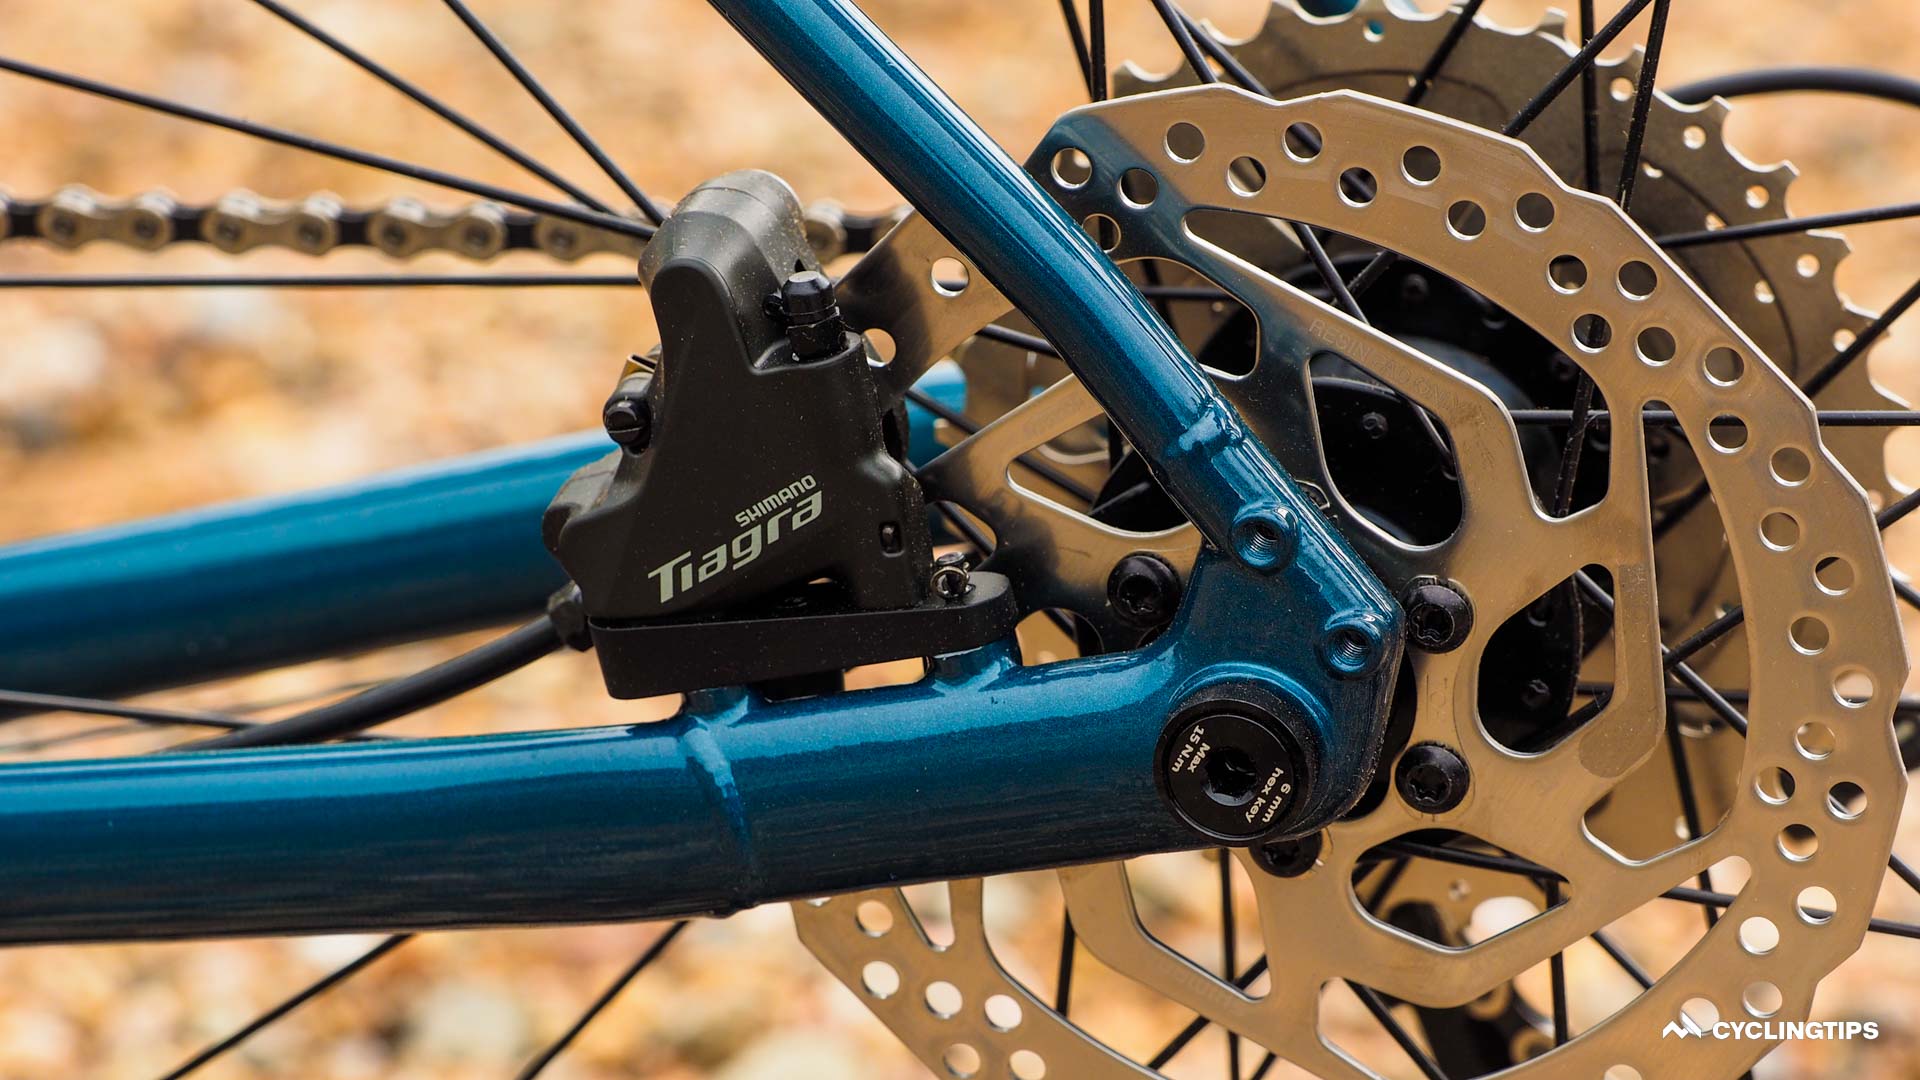 Do you really need hydraulic disc brakes or will mechanical ones do? - Velo